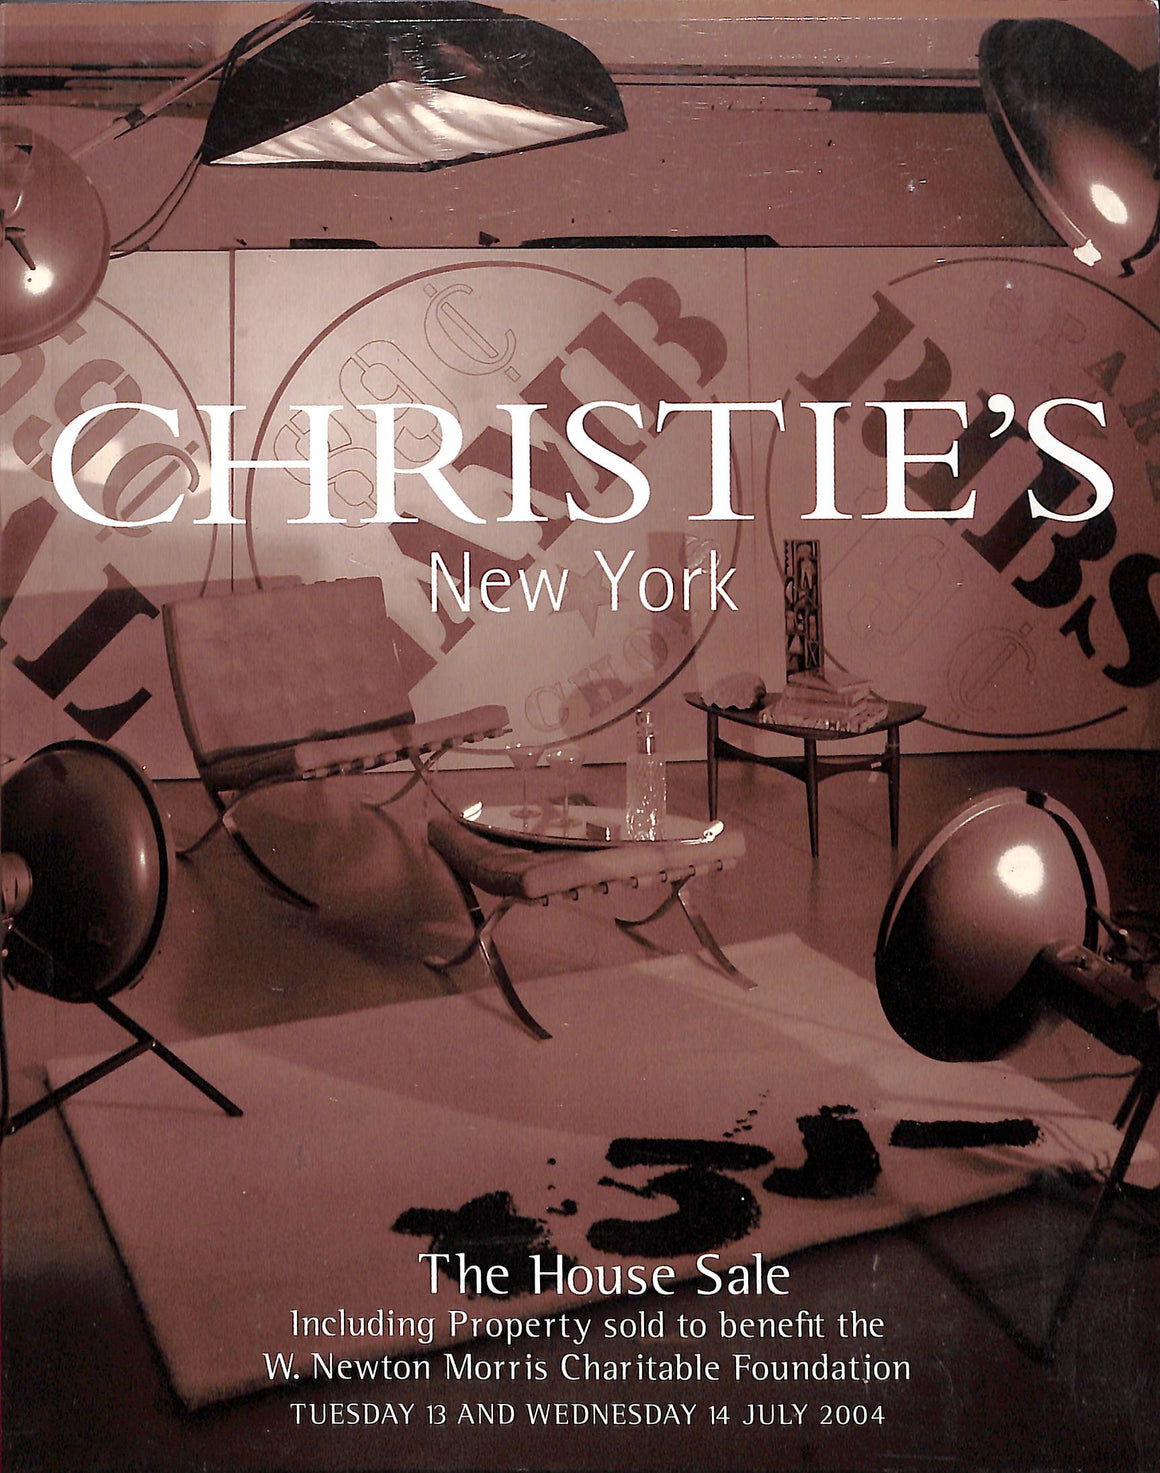 The House Sale Including Property Sold To Benefit The W. Newton Morris Charitable Foundation 2004 Christie's New York